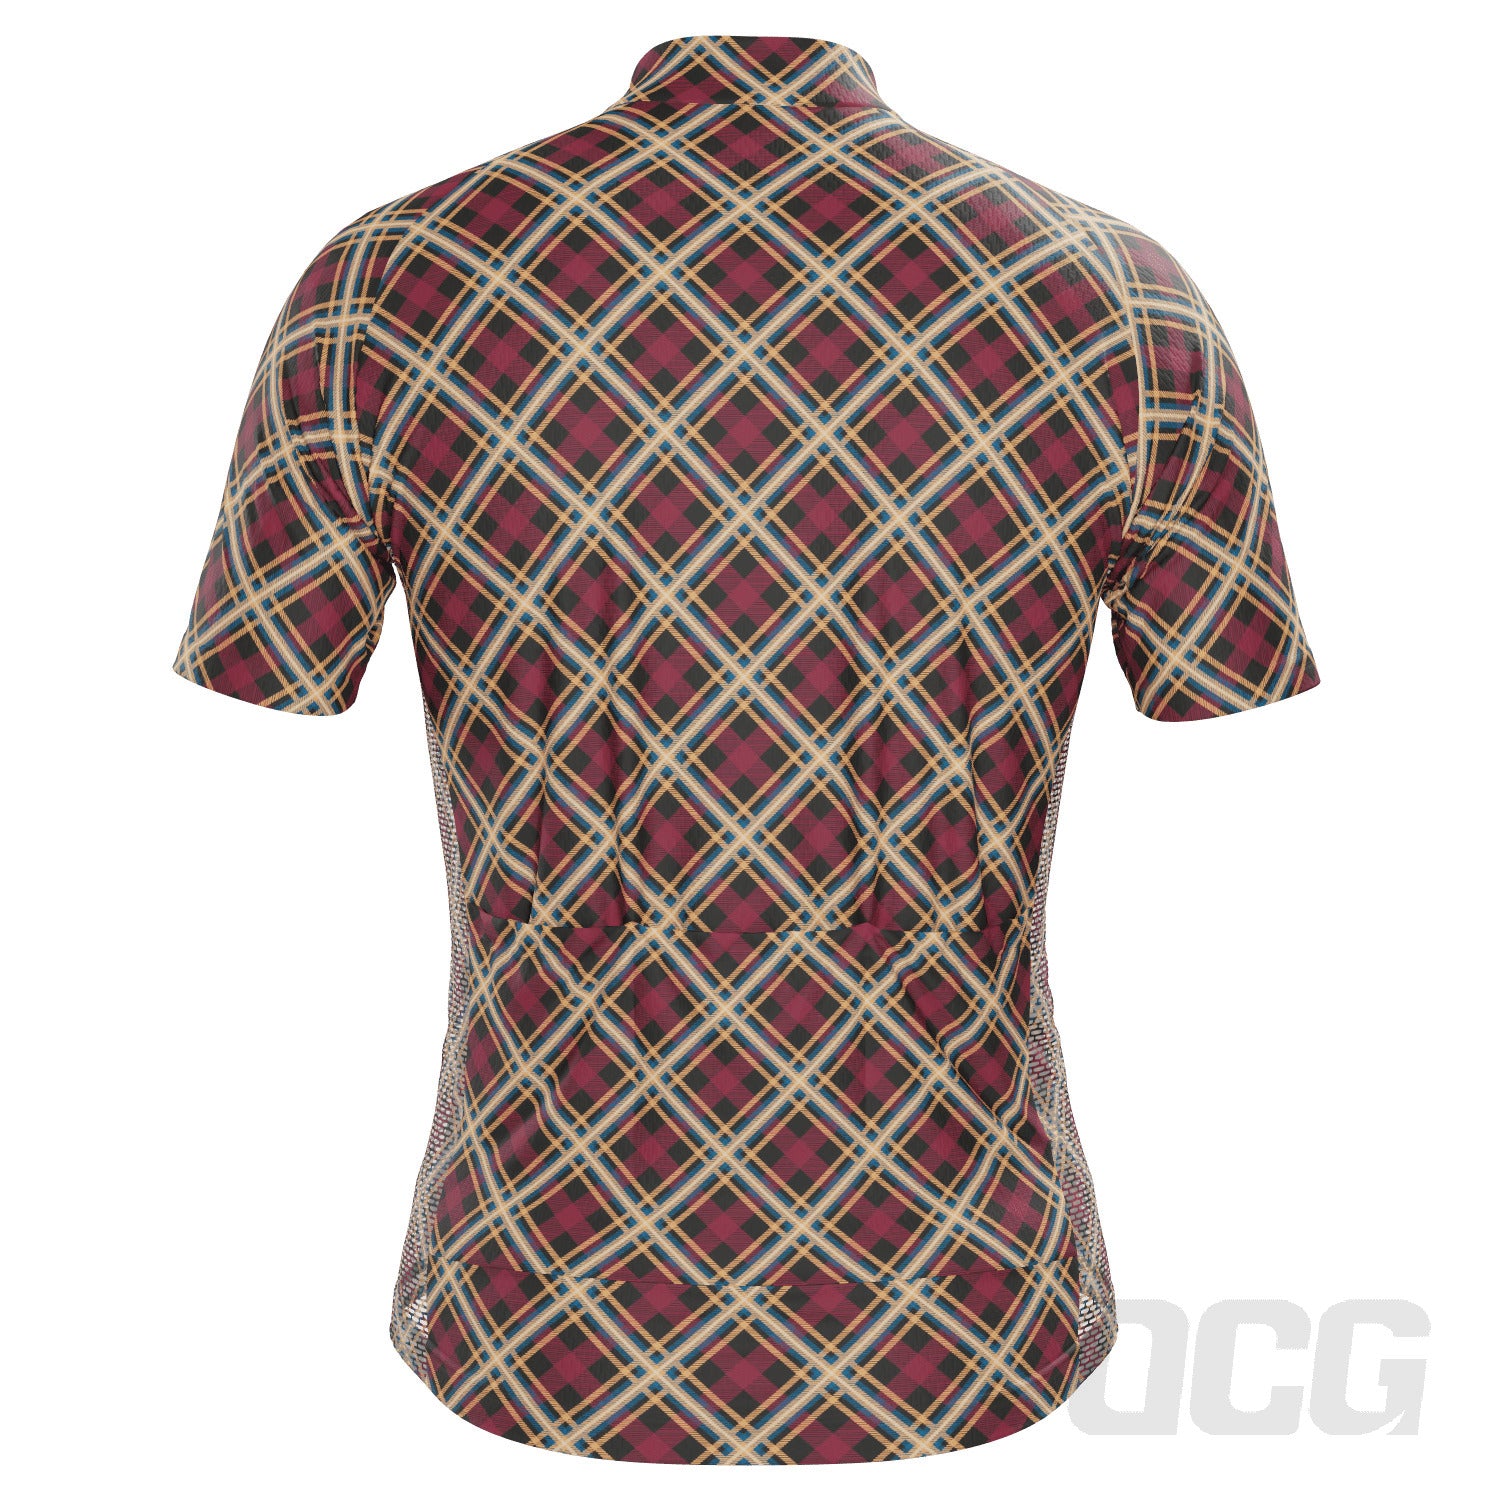 Men's Red Plaid Checkered Short Sleeve Cycling Jersey